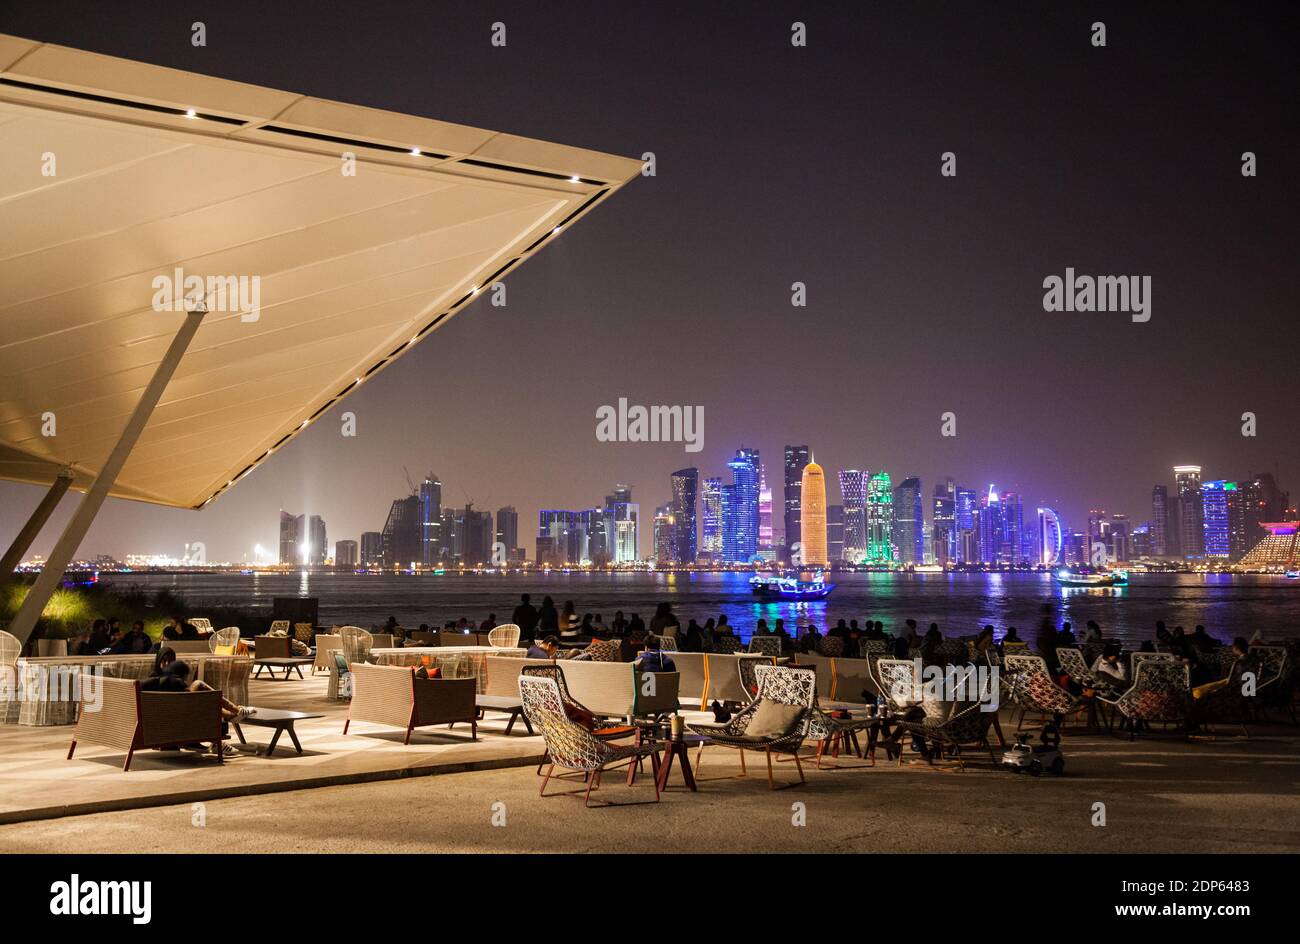 Cafe in front of the skyline of Doha, Qatar Stock Photo